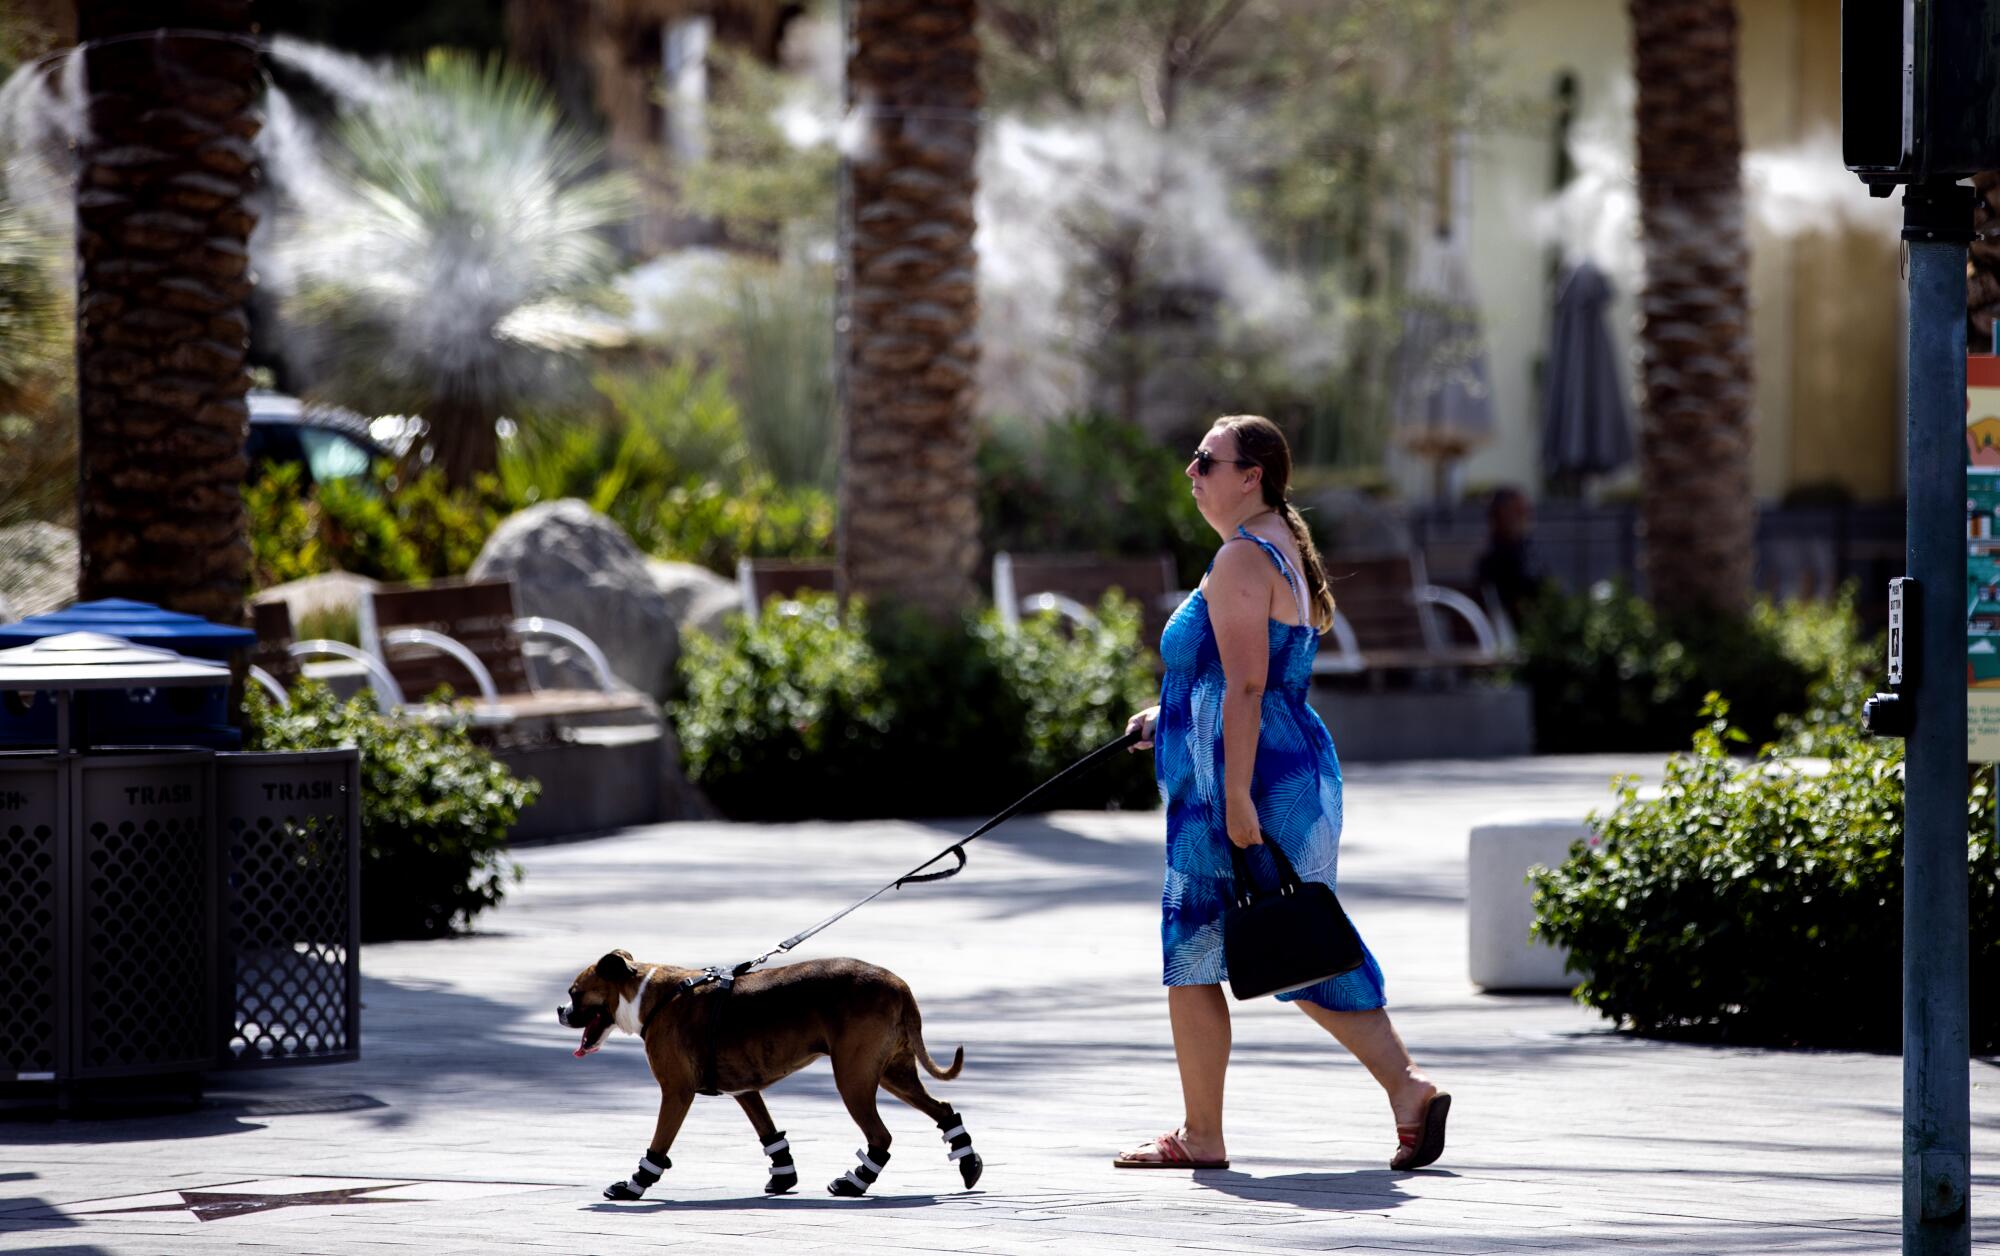 A woman in a sundress walks her dog, which is wearing booties to protect its paws from the hot pavement